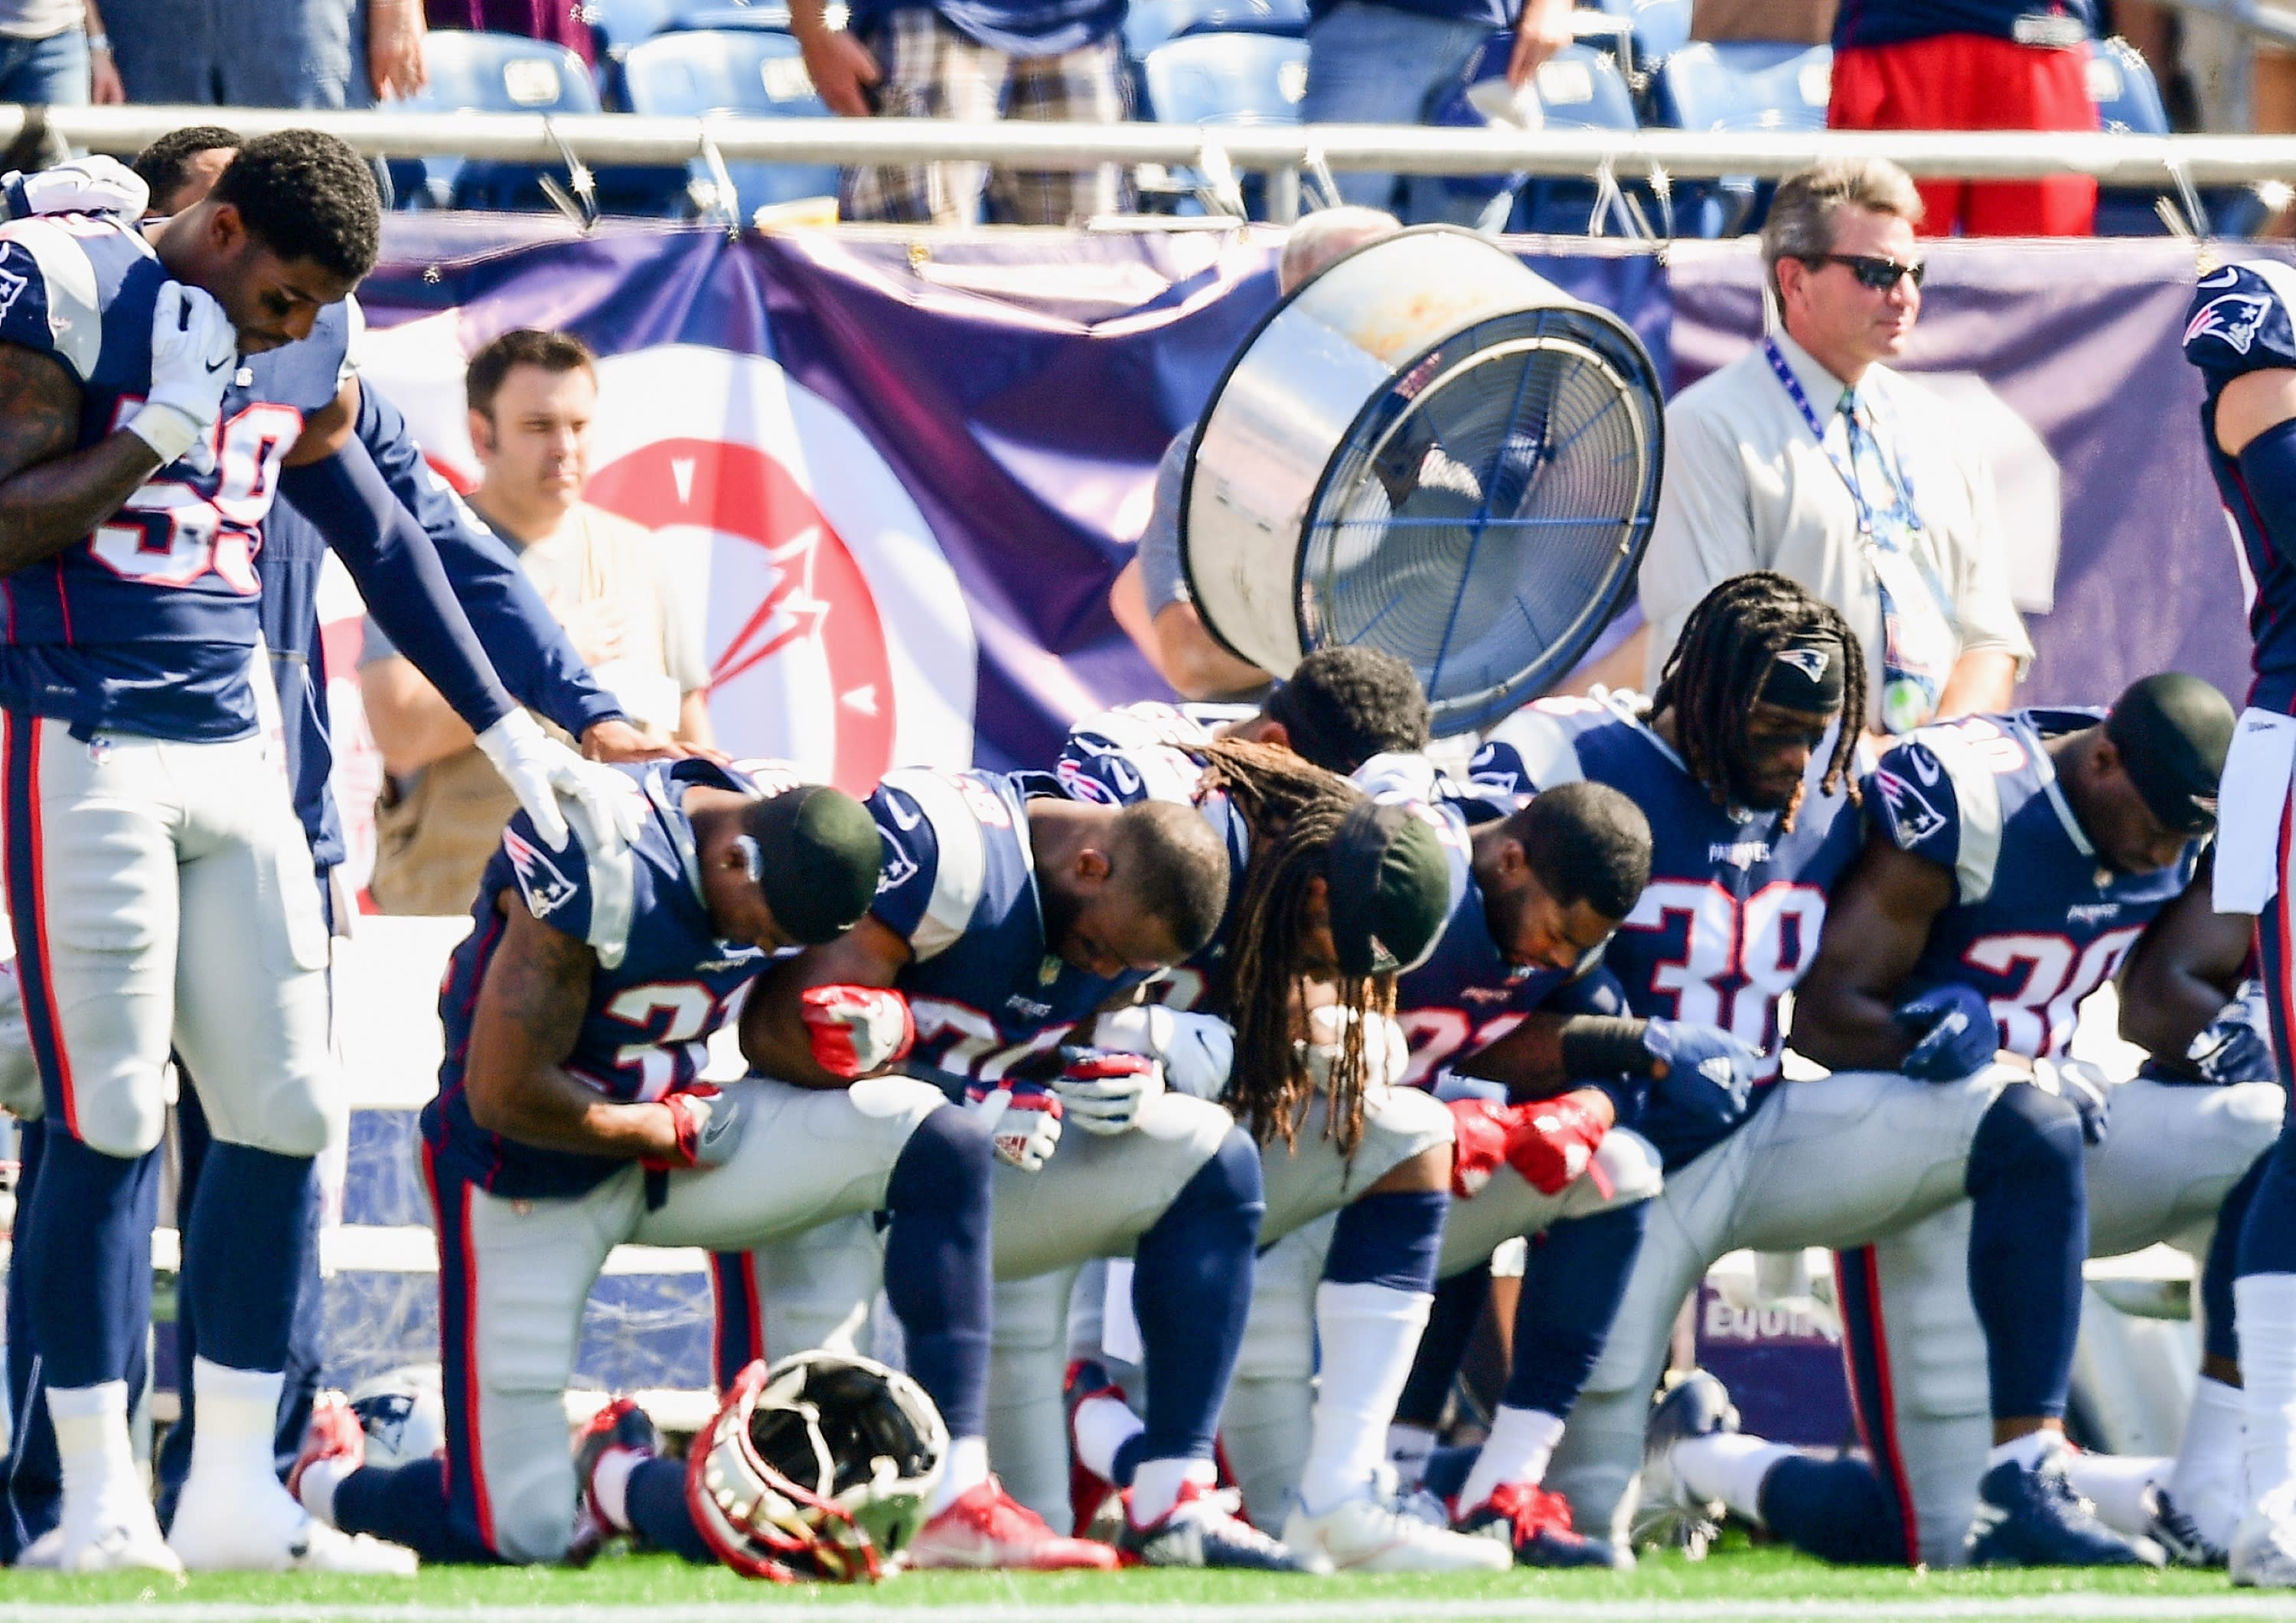 NFL players' fight heats up vs. national anthem policy